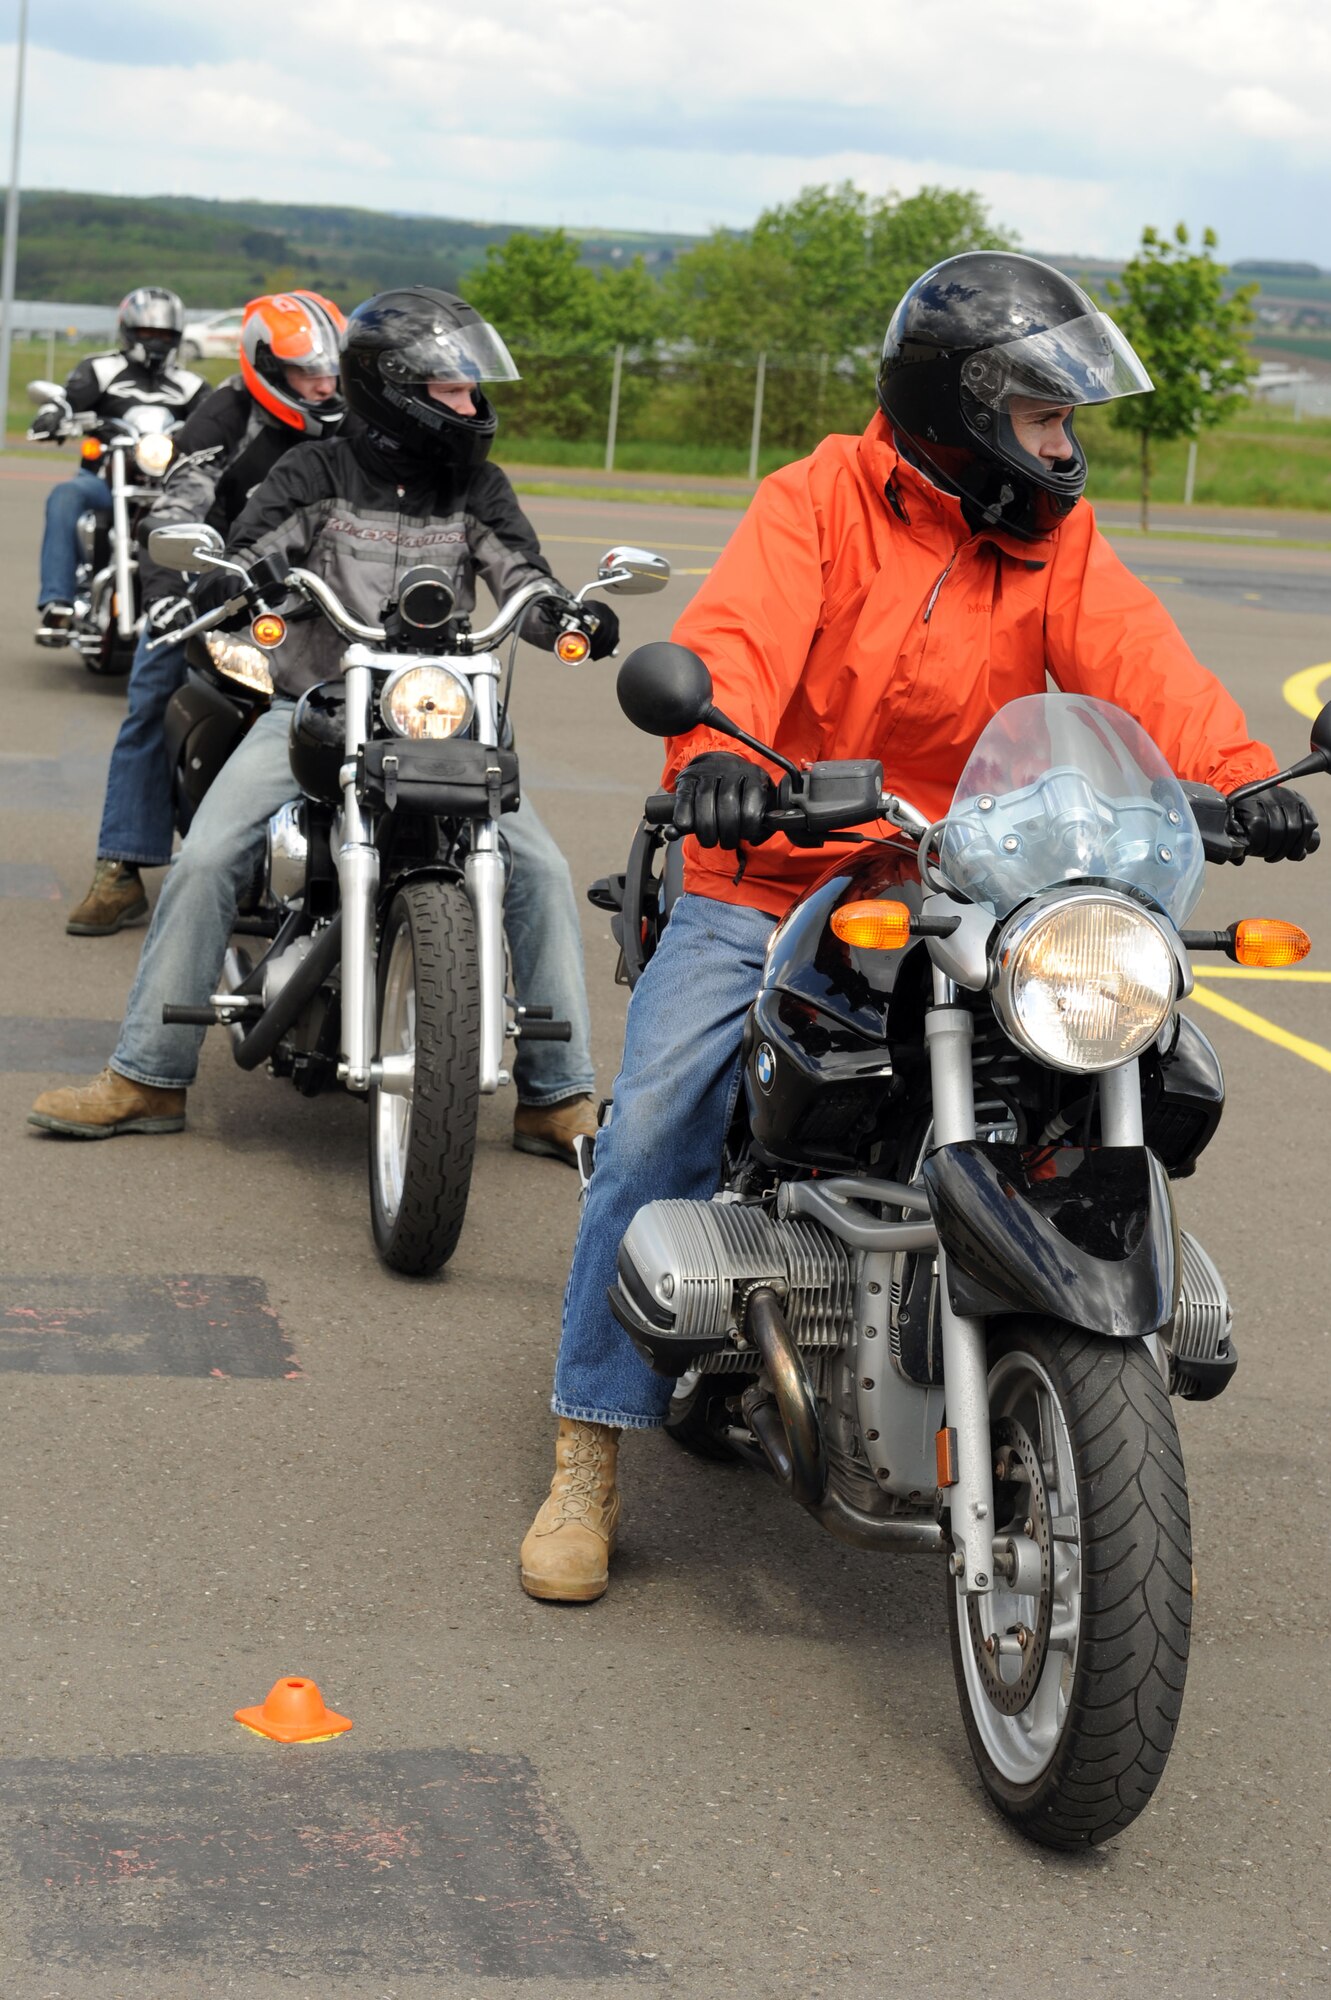 SPANGDAHLEM AIR BASE, Germany – Motorcycle riders wait for their turn to execute maneuvers during a motorcycle safety class at the Saber driving course here May 15. The course participants practiced maneuvers to include path of travel, quick stops and obstacle avoidance. The class is geared to improve riders’ skill by performing different maneuvers on the course as well as discussing and reviewing a variety of safety information. The 52nd Fighter Wing Safety office conducts the motorcycle safety course three times monthly. U.S Air Forces in Europe regulations mandate that every motorcyclist on base must take or retake this class once every three years to keep their skillset current. (U.S. Air Force photo by Senior Airman Christopher Toon/Released)